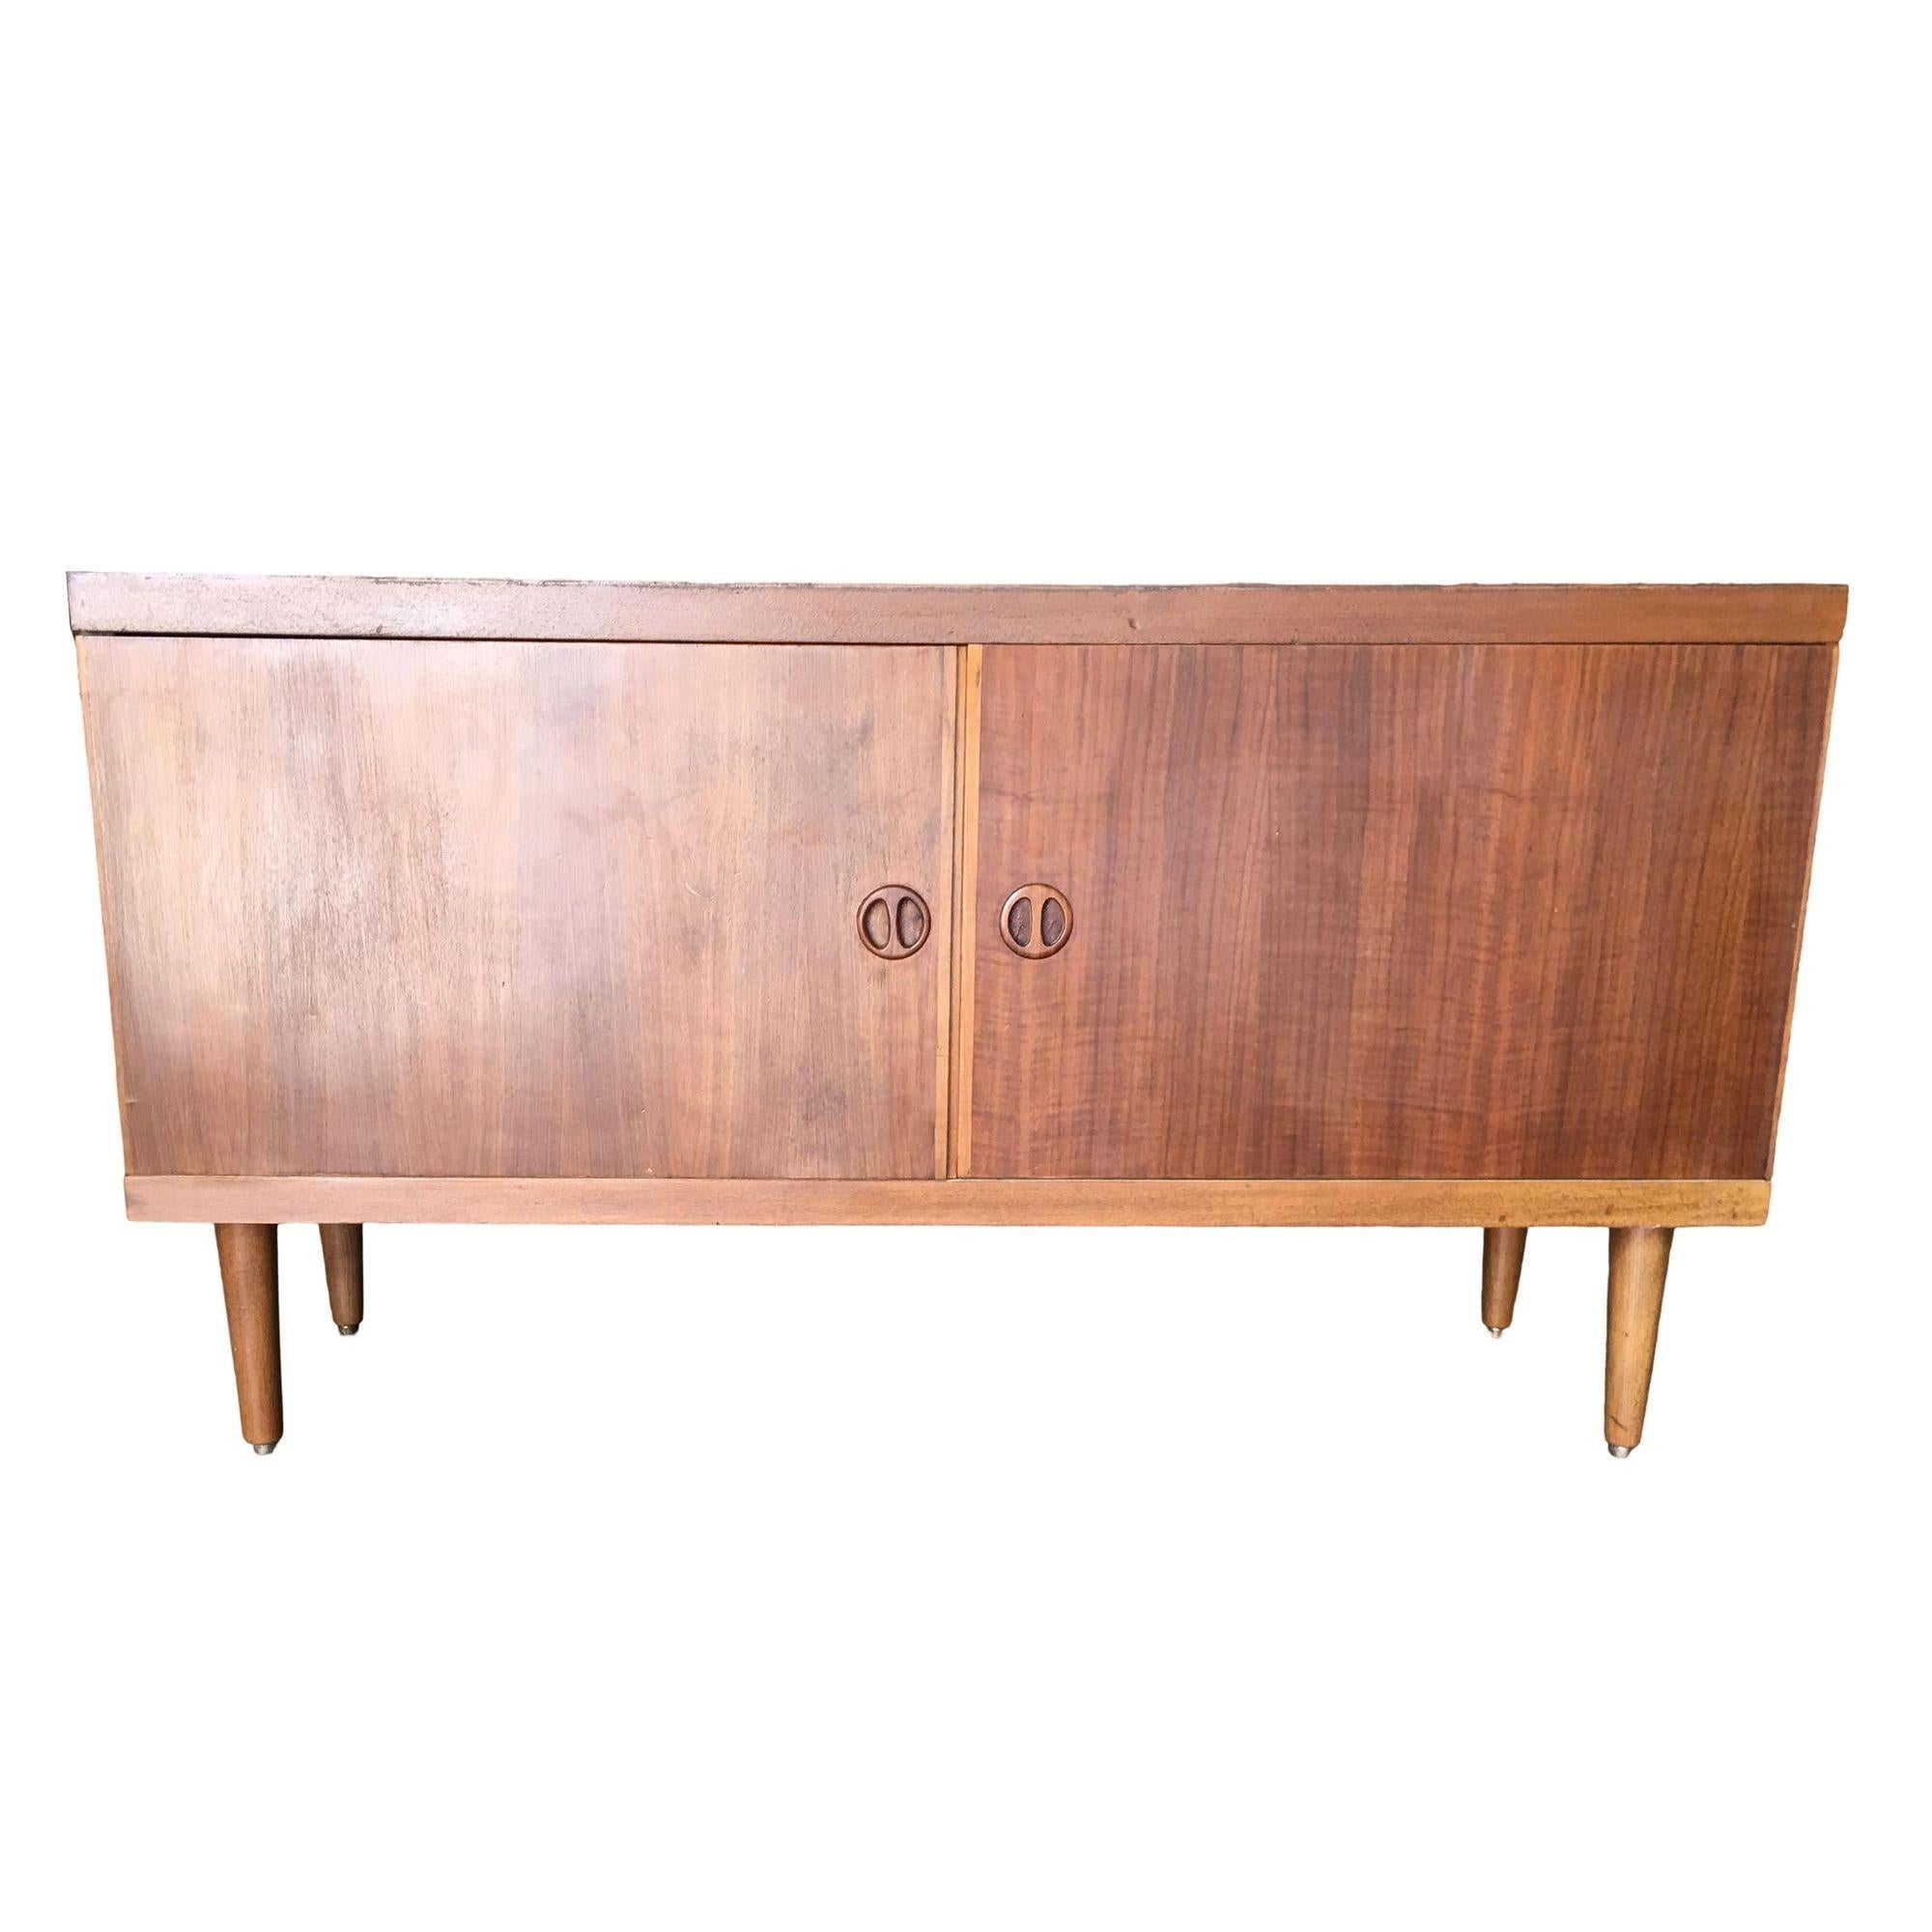 This small Danish style rose stained credenza cabinet with tapered legs, sculpted pig nose pulls and two easy swing doors. It features two large chubby spaces for storage. The cabinet is a great size for a smaller dwelling or for tighter wall space.